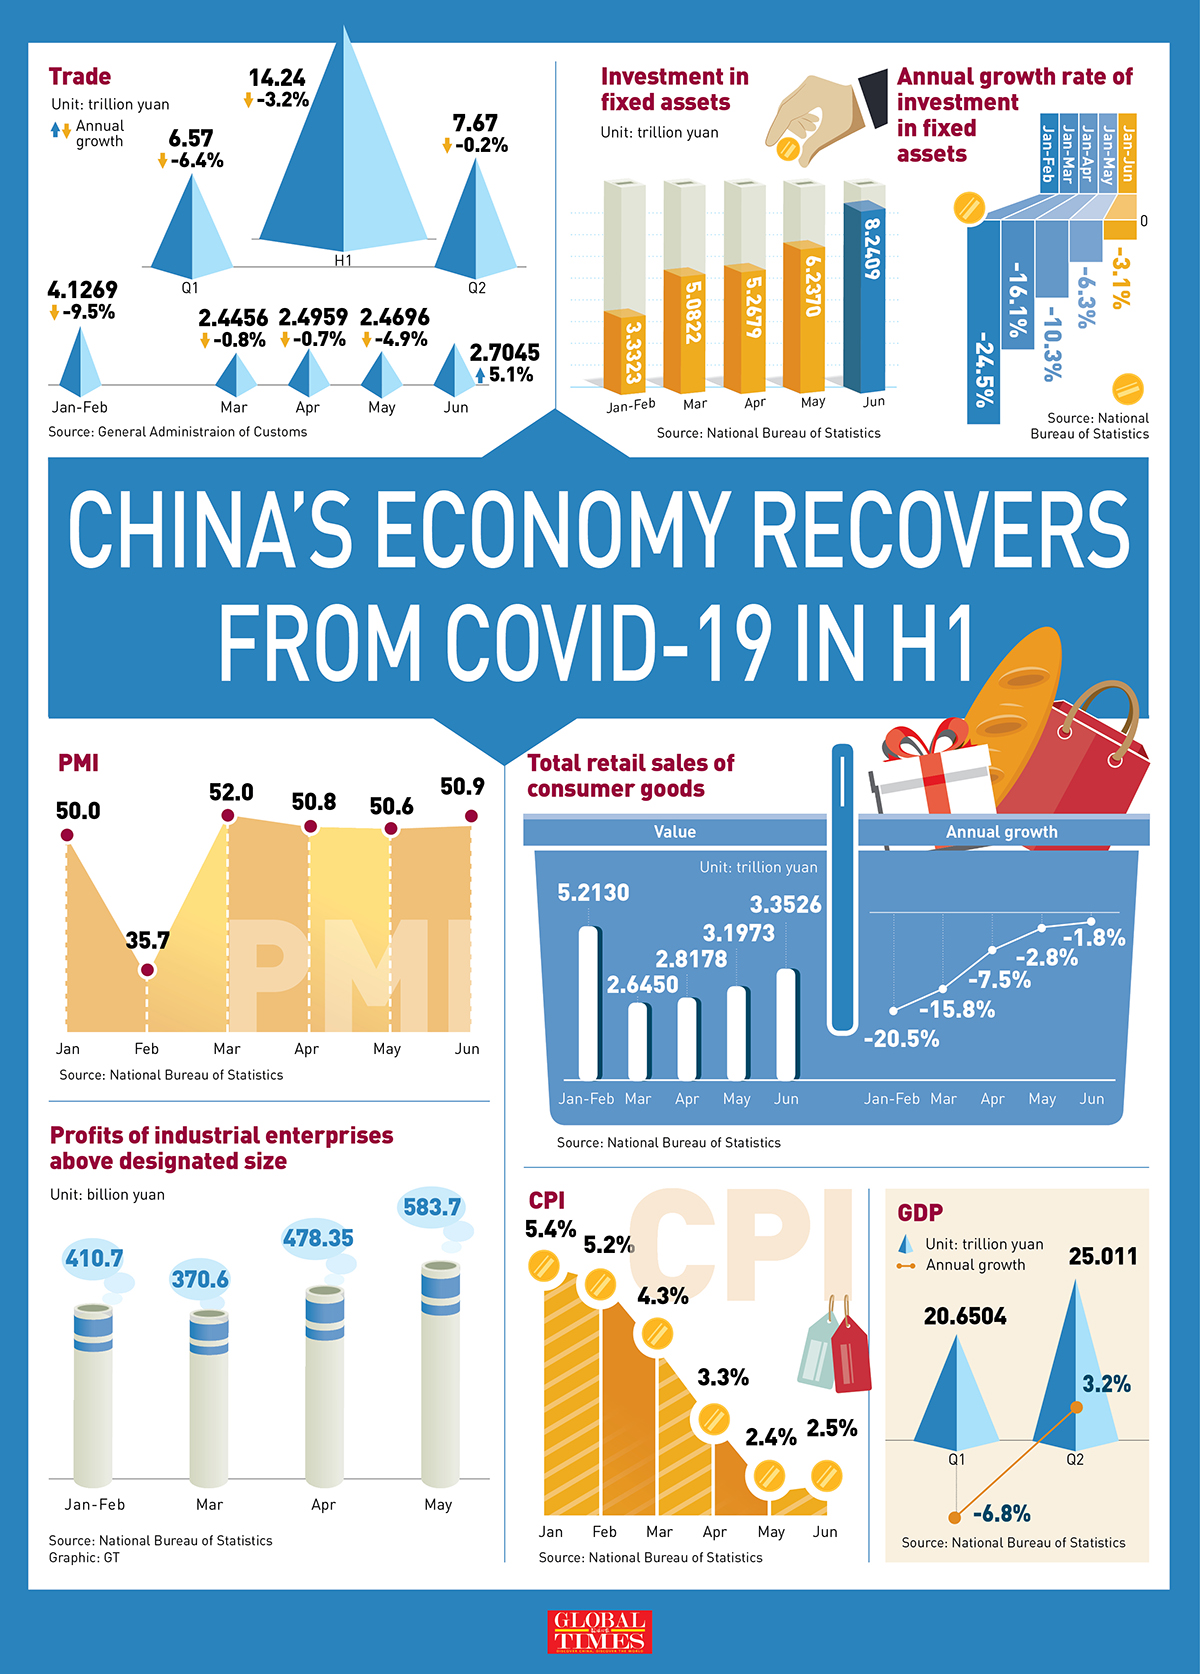 China’s GDP up 3.2 in Q2, 1st major economy to return to